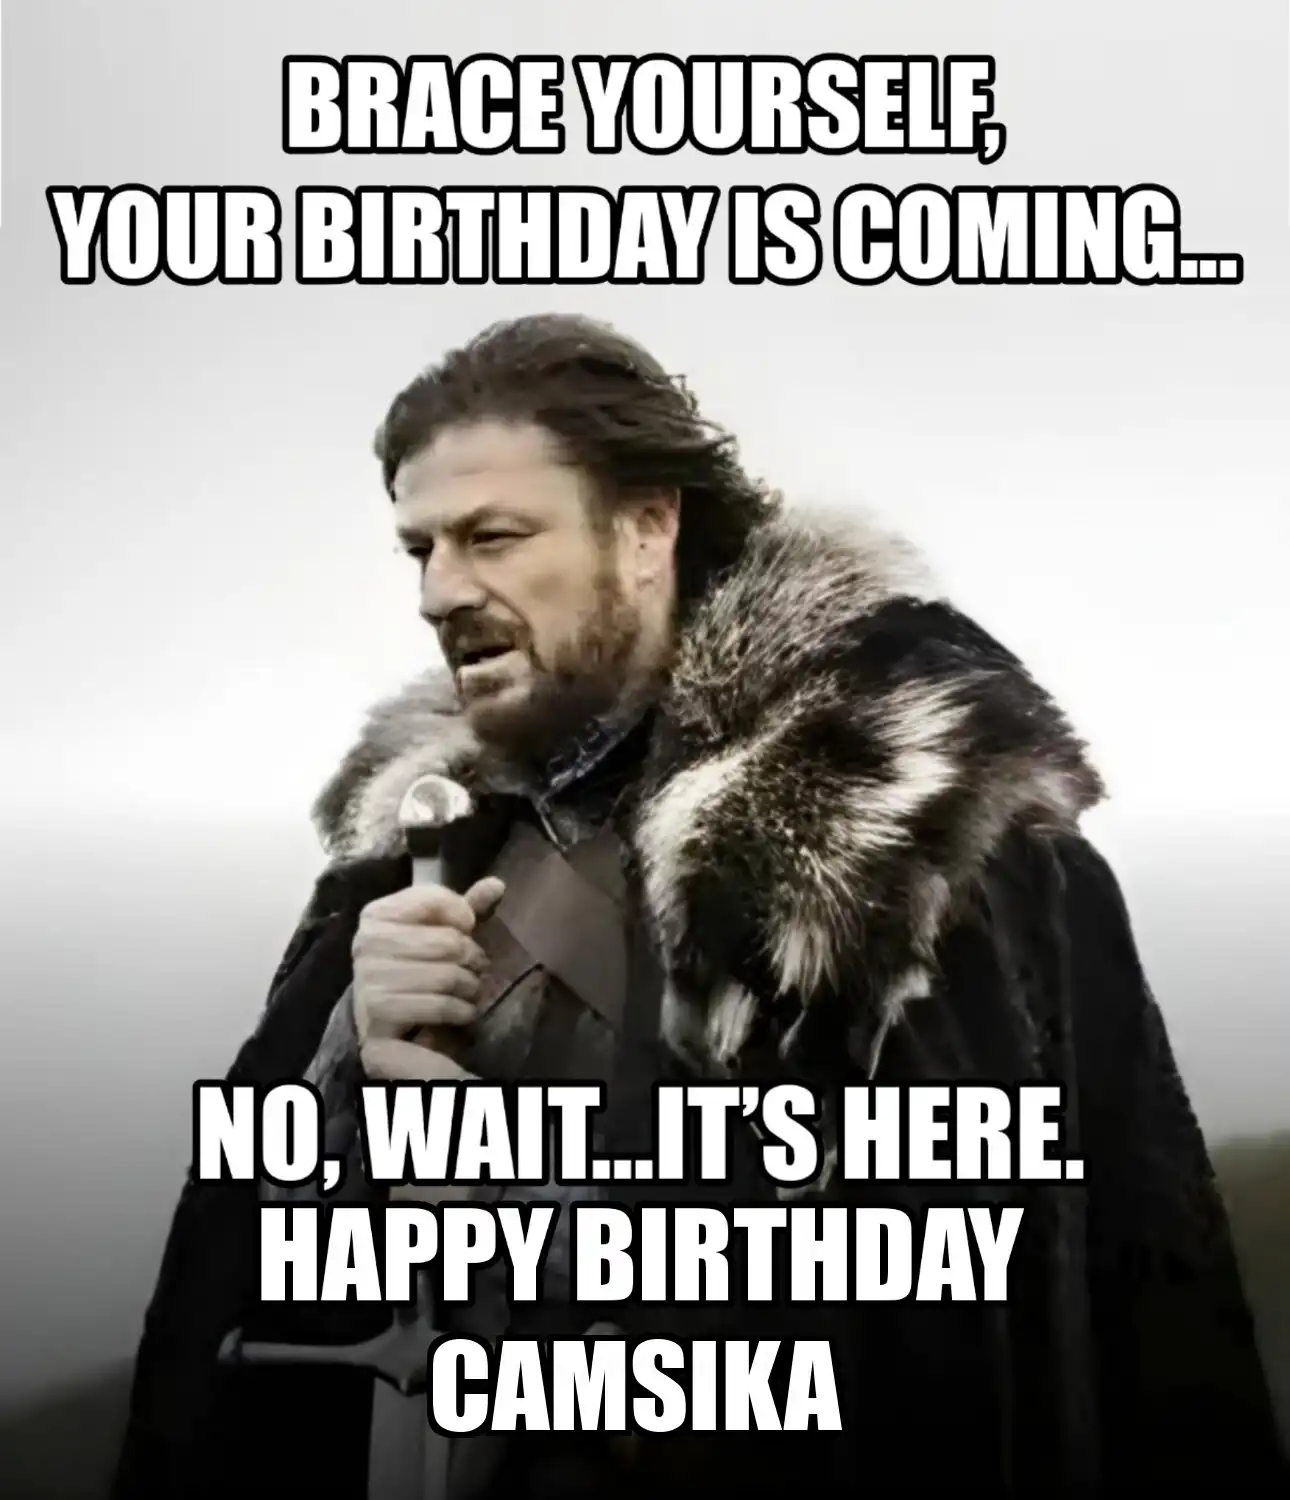 Happy Birthday Camsika Brace Yourself Your Birthday Is Coming Meme